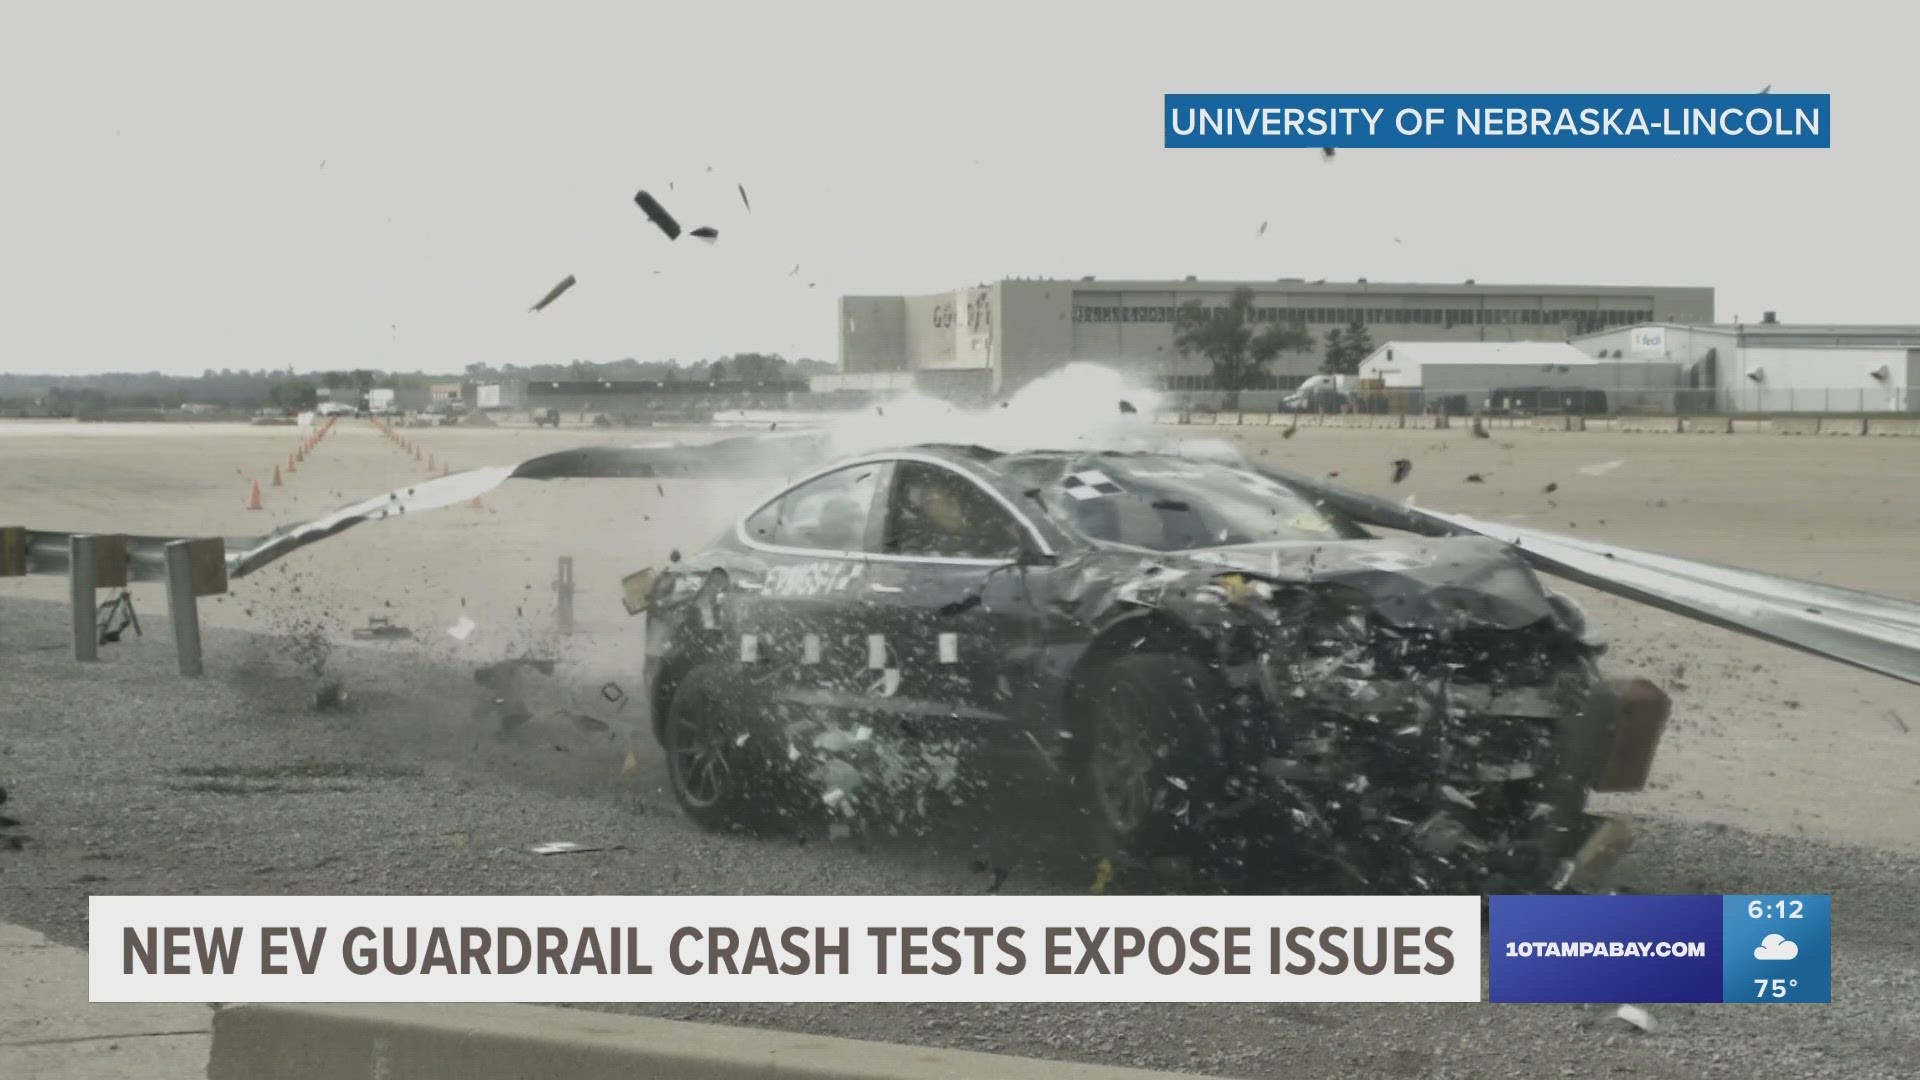 Researchers say more testing is needed after "concerning" crash tests.